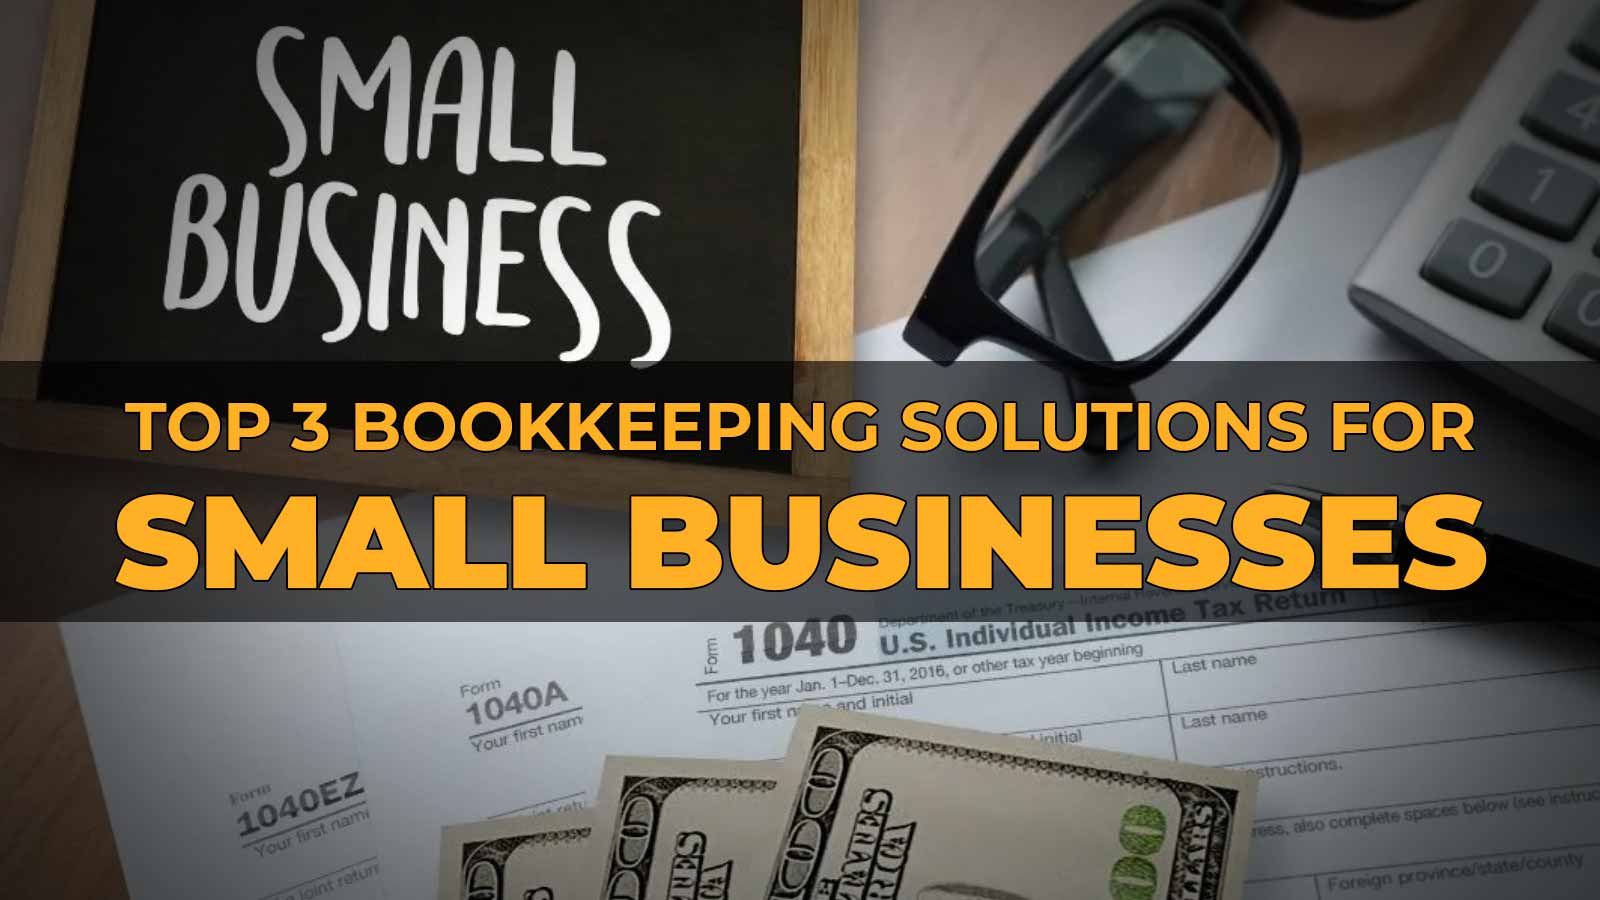 Bookkeeping Solutions for Small Businesses